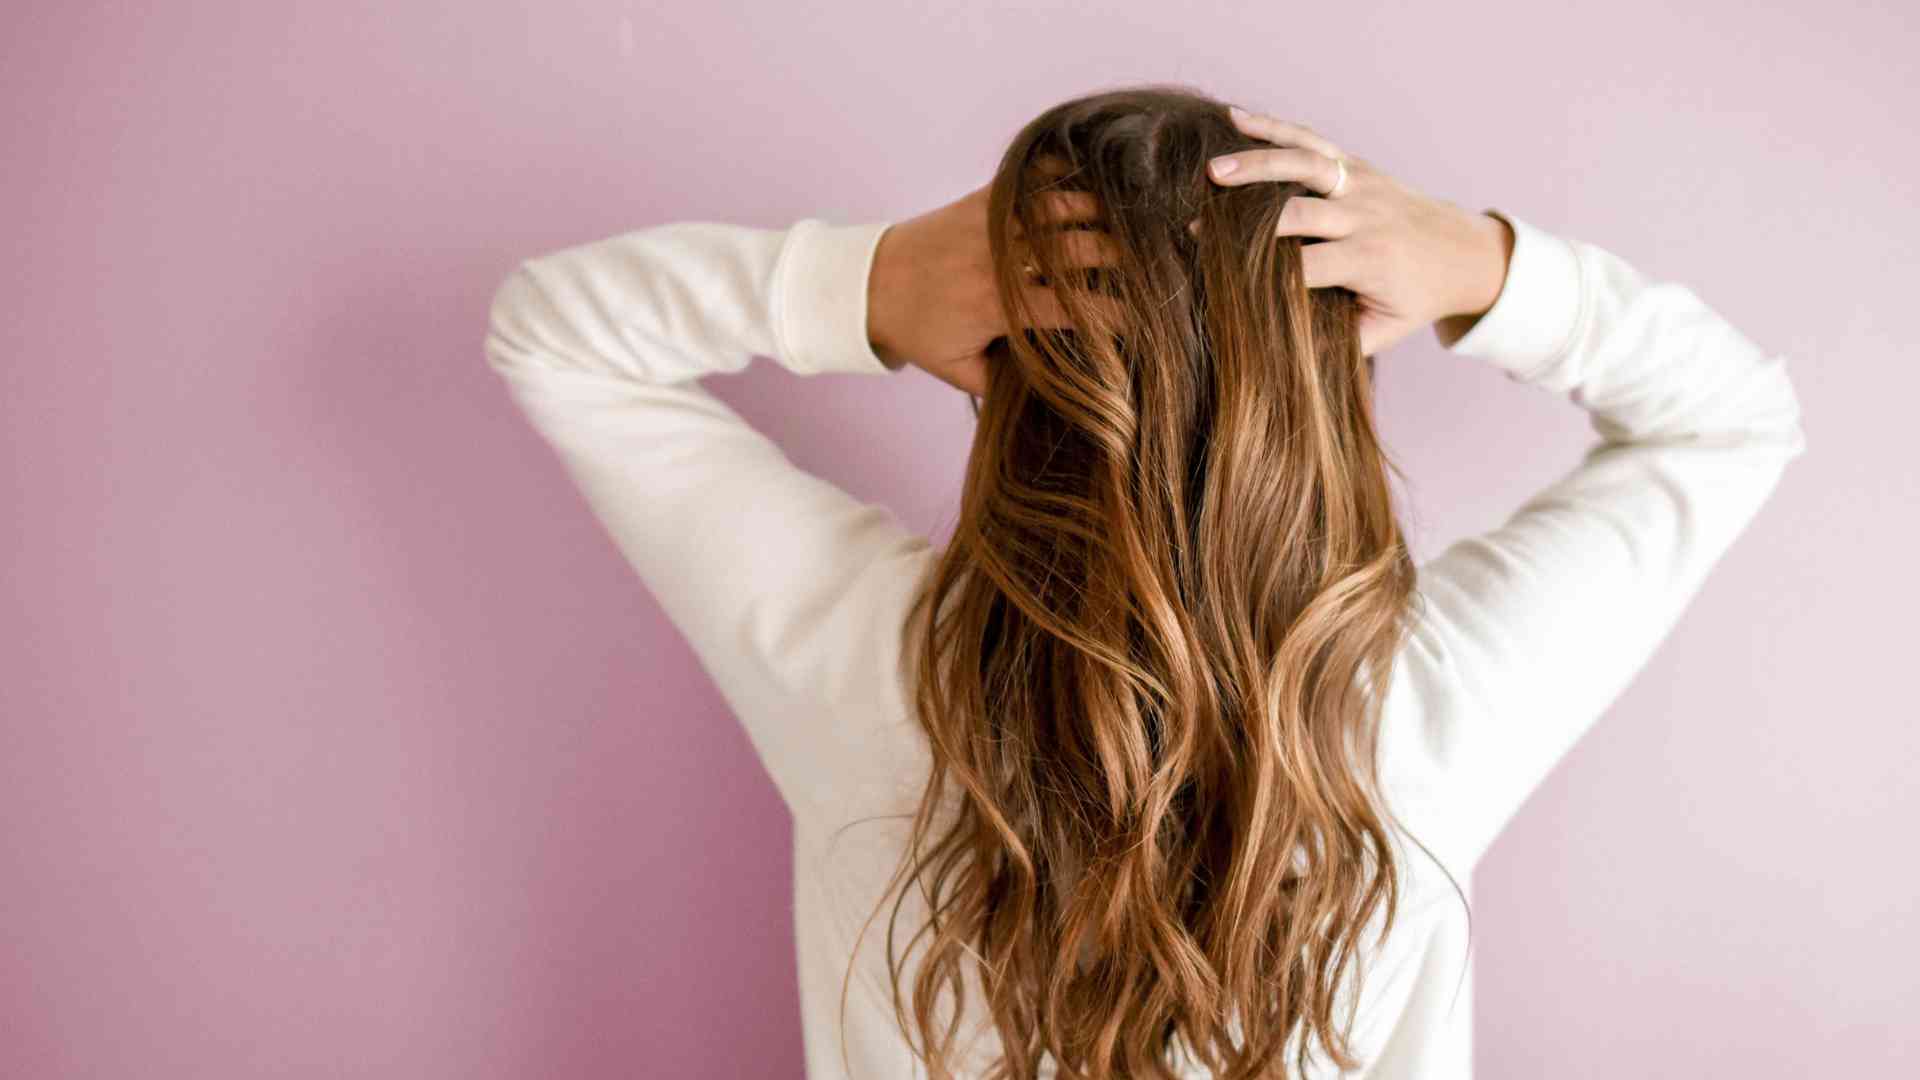 can a dermatologist help with hair loss